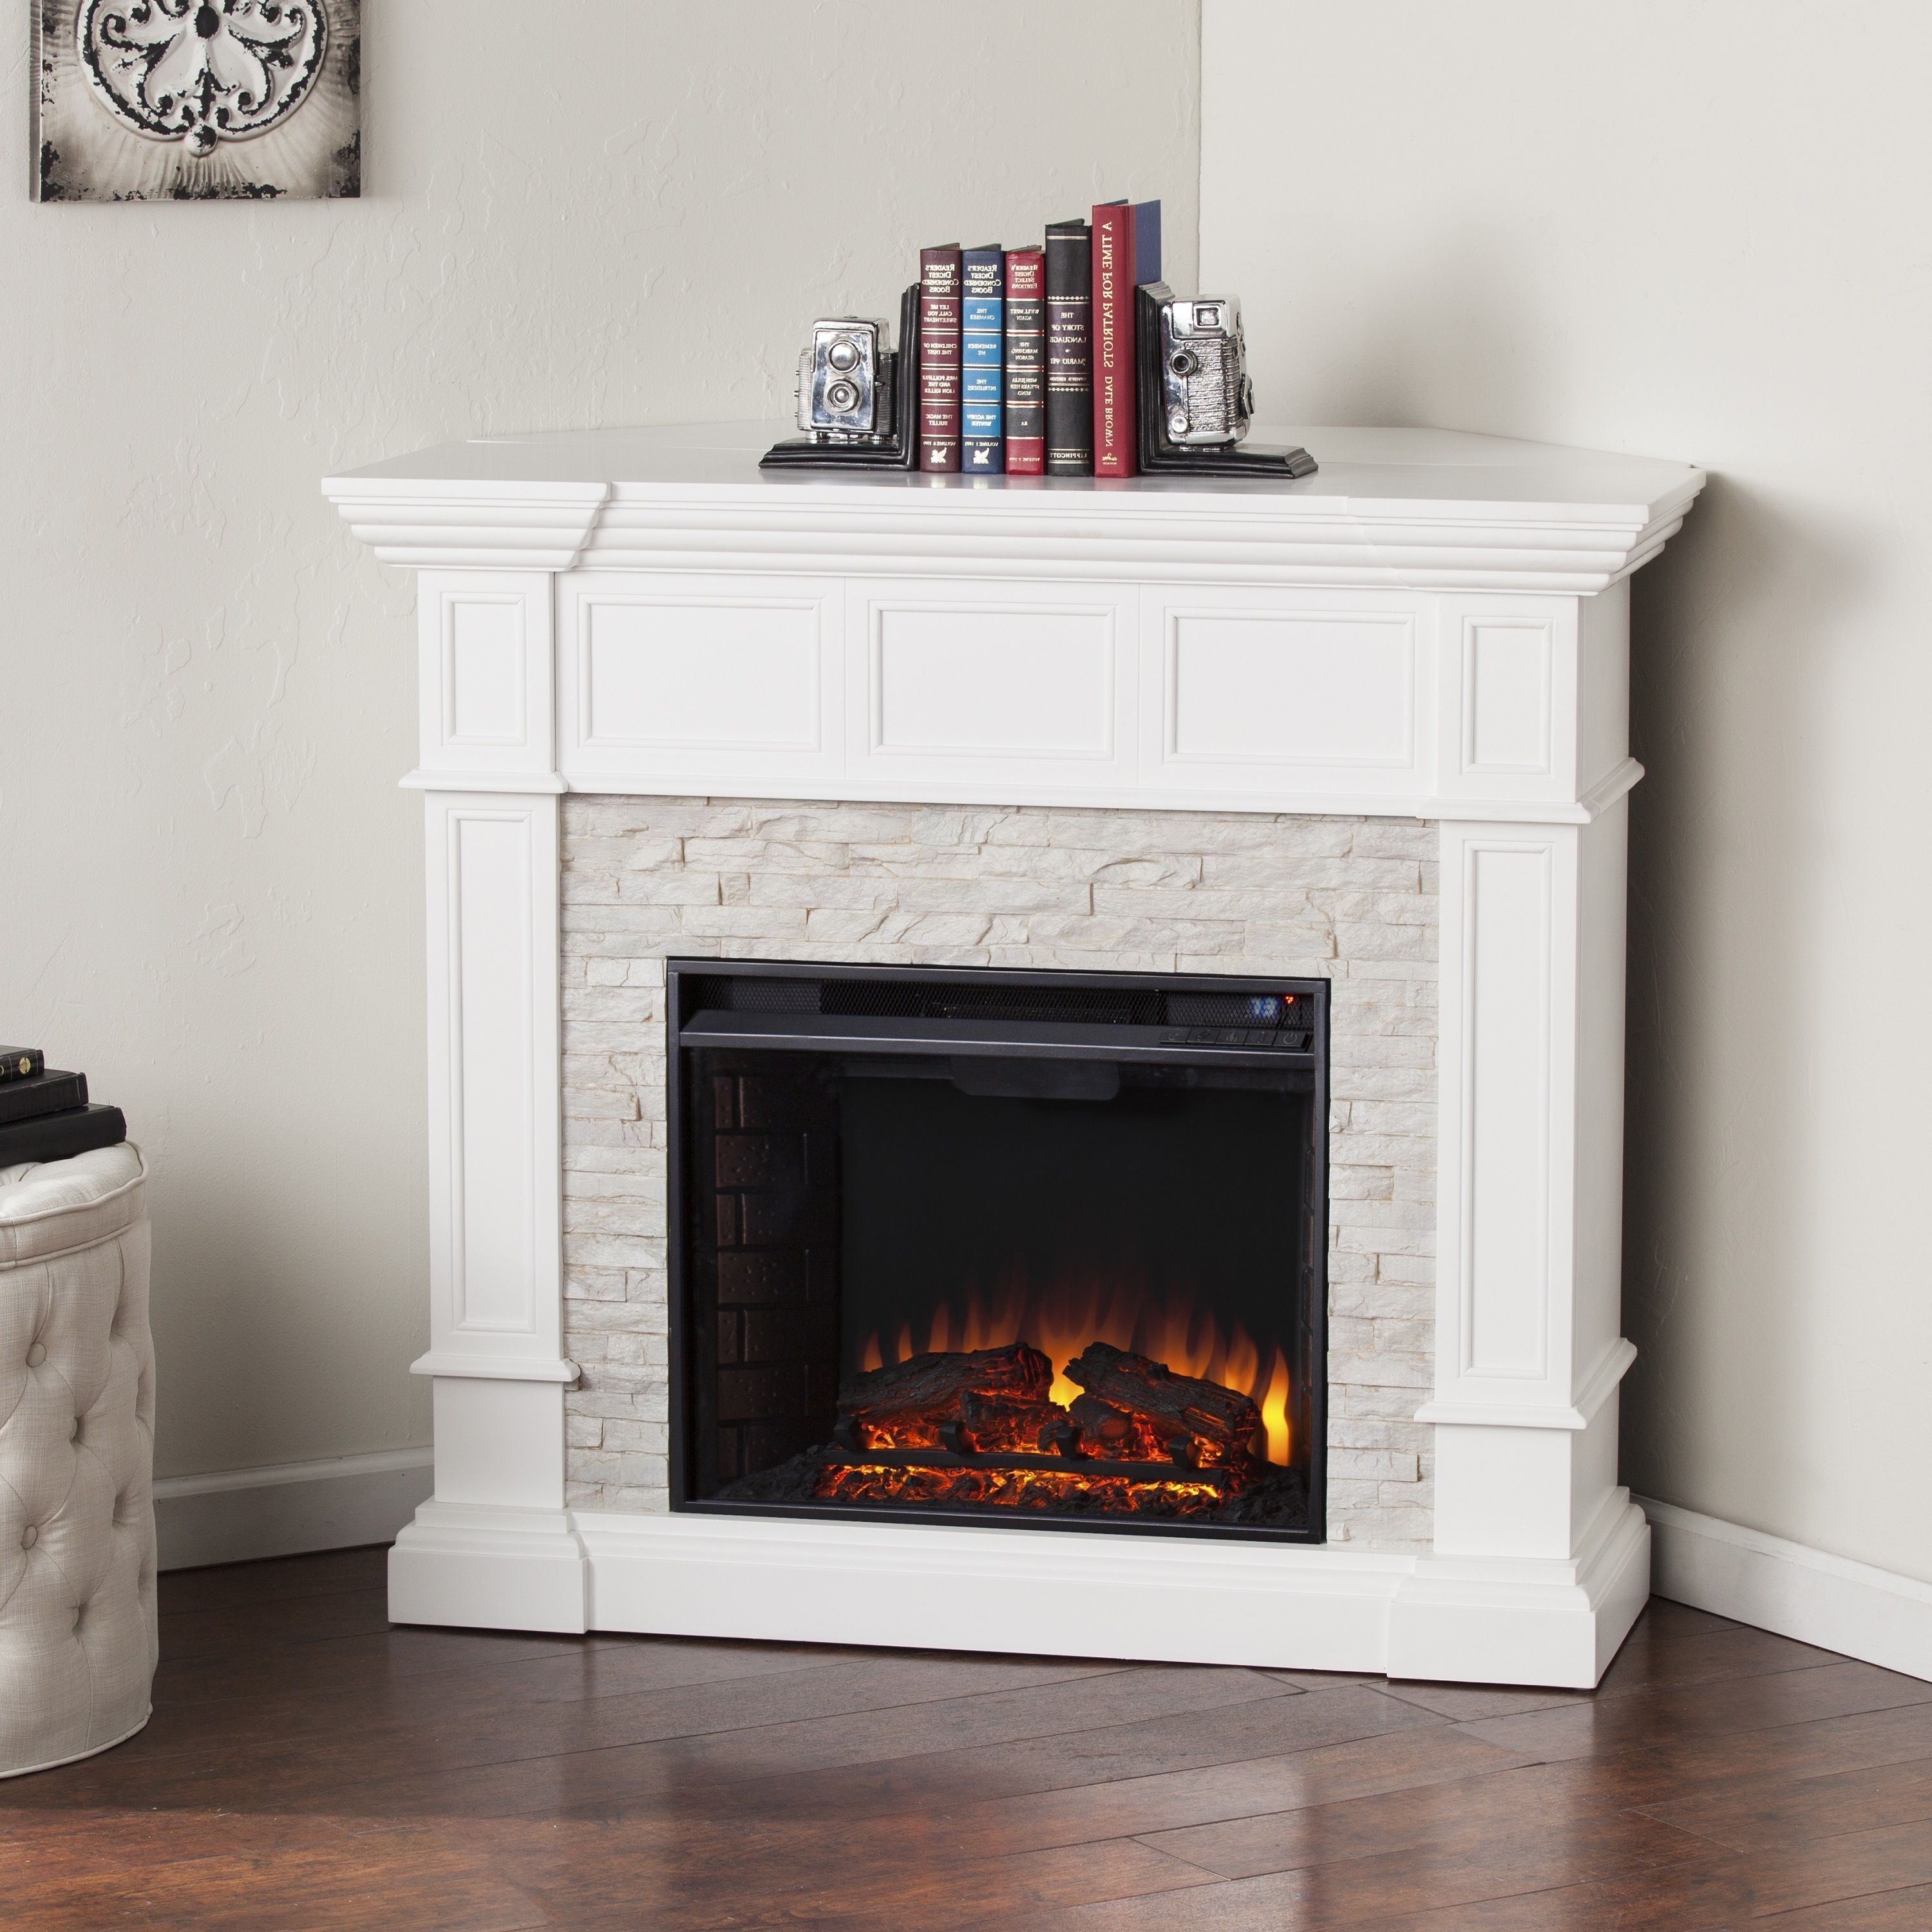 Corner Infrared Fireplace Fresh 33 Modern and Traditional Corner Fireplace Ideas Remodel